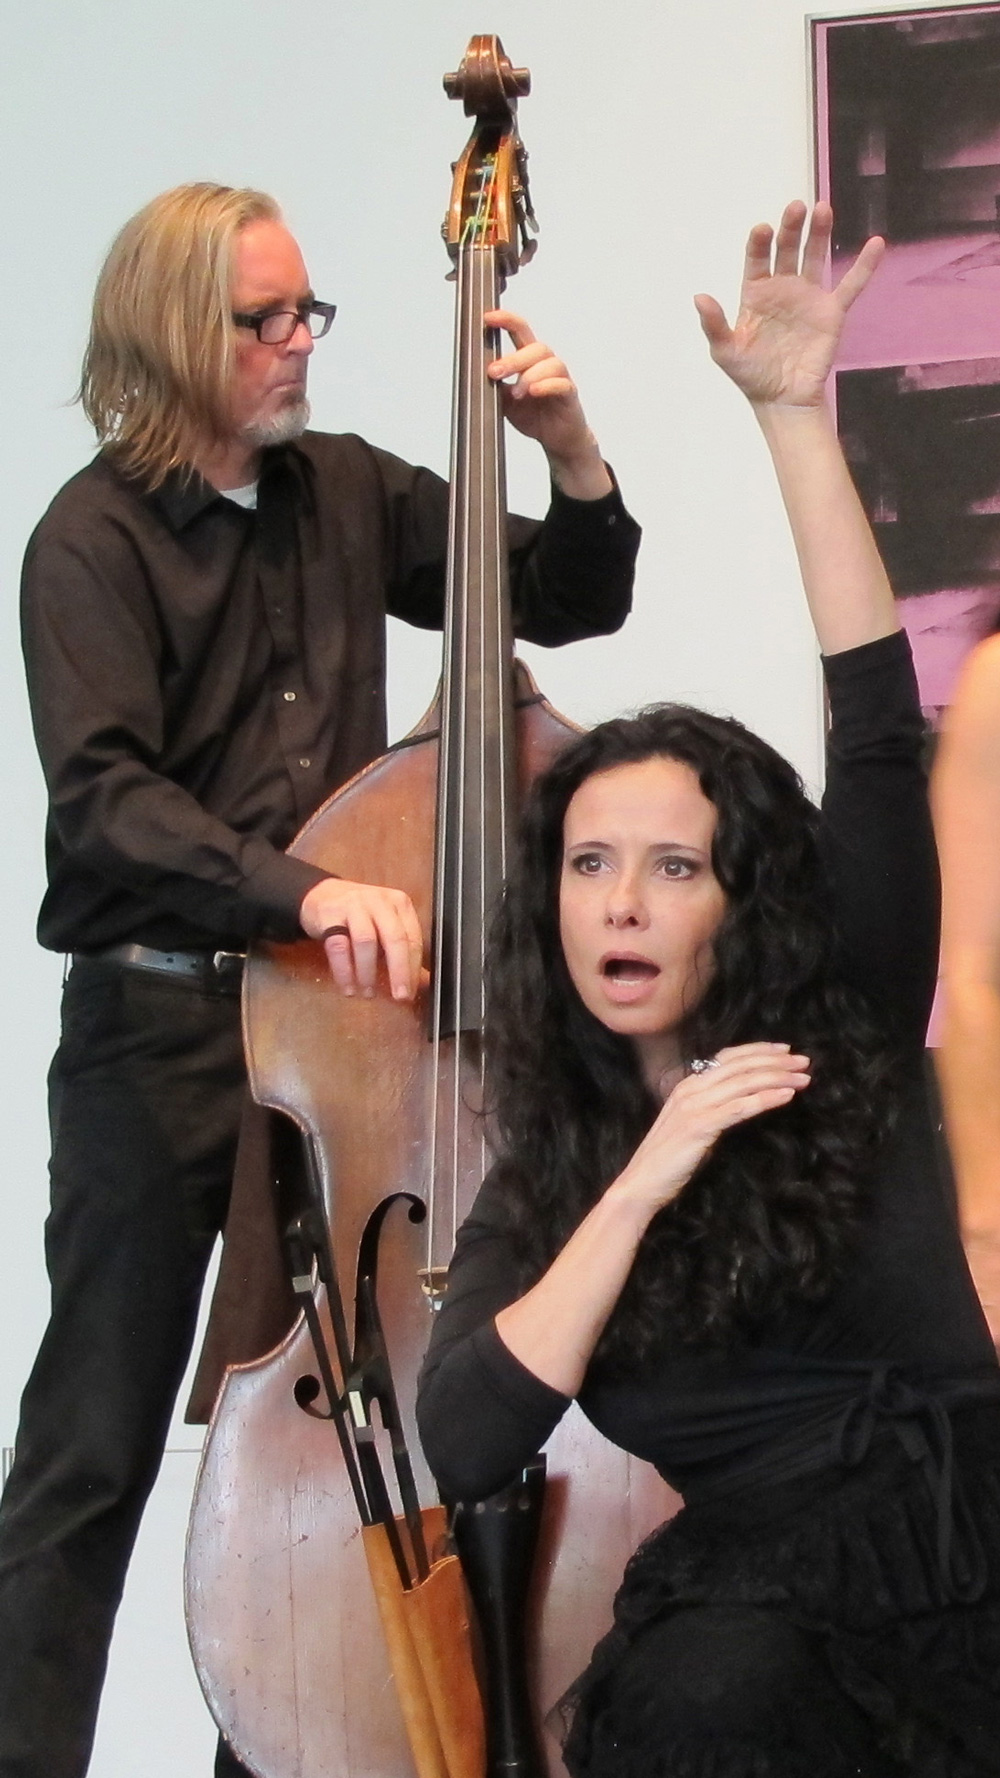  Siren on the Sabine. Misha Penton, soprano, concept text, artistic direction. Thomas Helton, double bass. Music devised by Misha Penton and Thomas Helton. Toni Valle and Lindsey McGill, dancers 